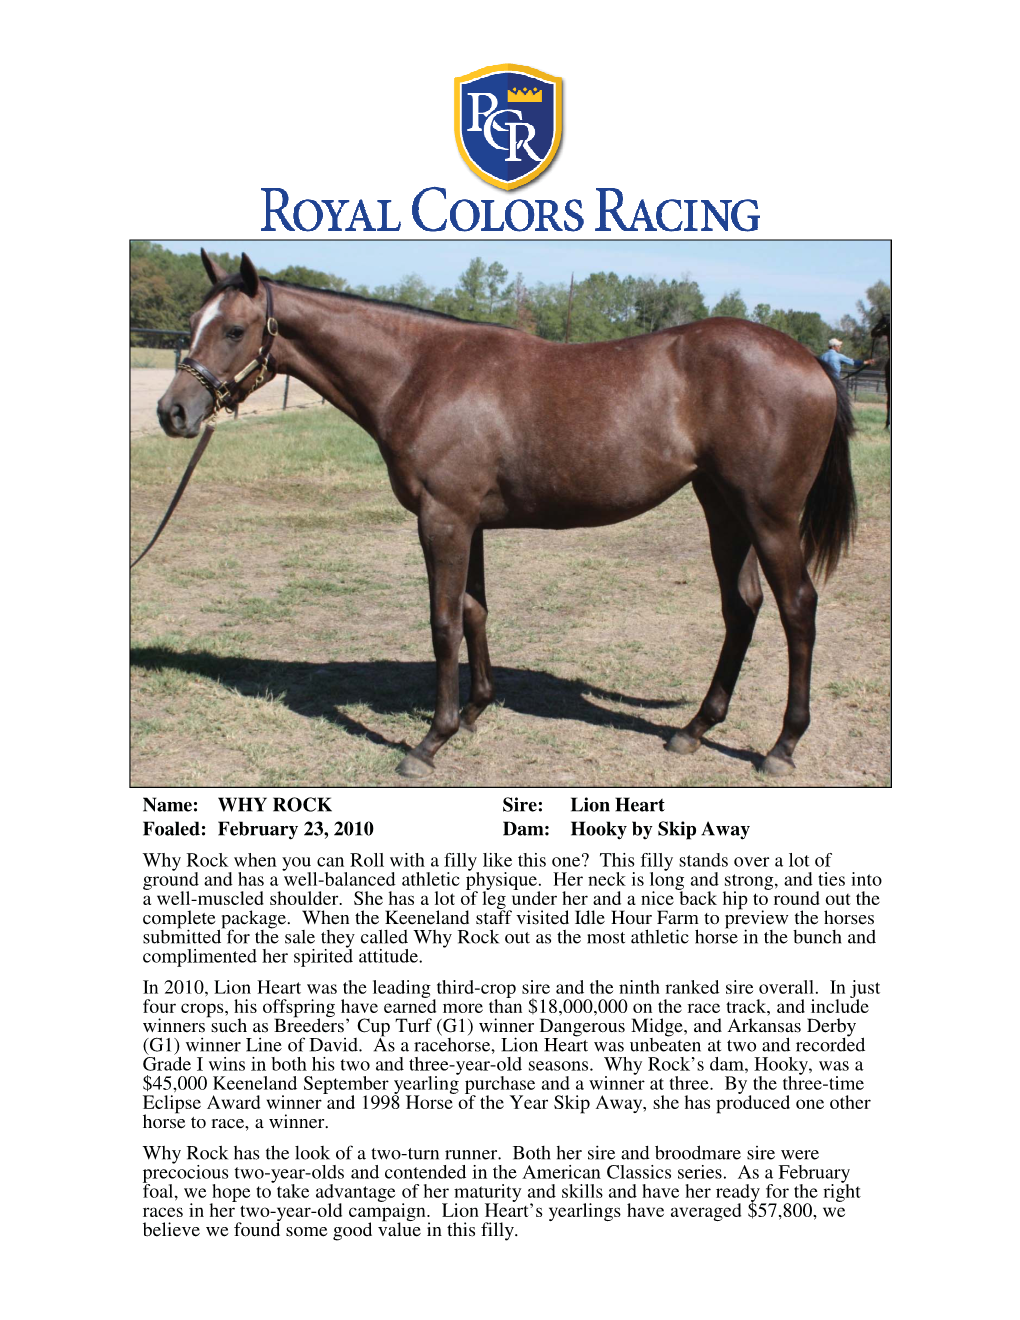 Hooky by Skip Away Why Rock When You Can Roll with a Filly Like This One? This Filly Stands Over a Lot of Ground and Has a Well-Balanced Athletic Physique